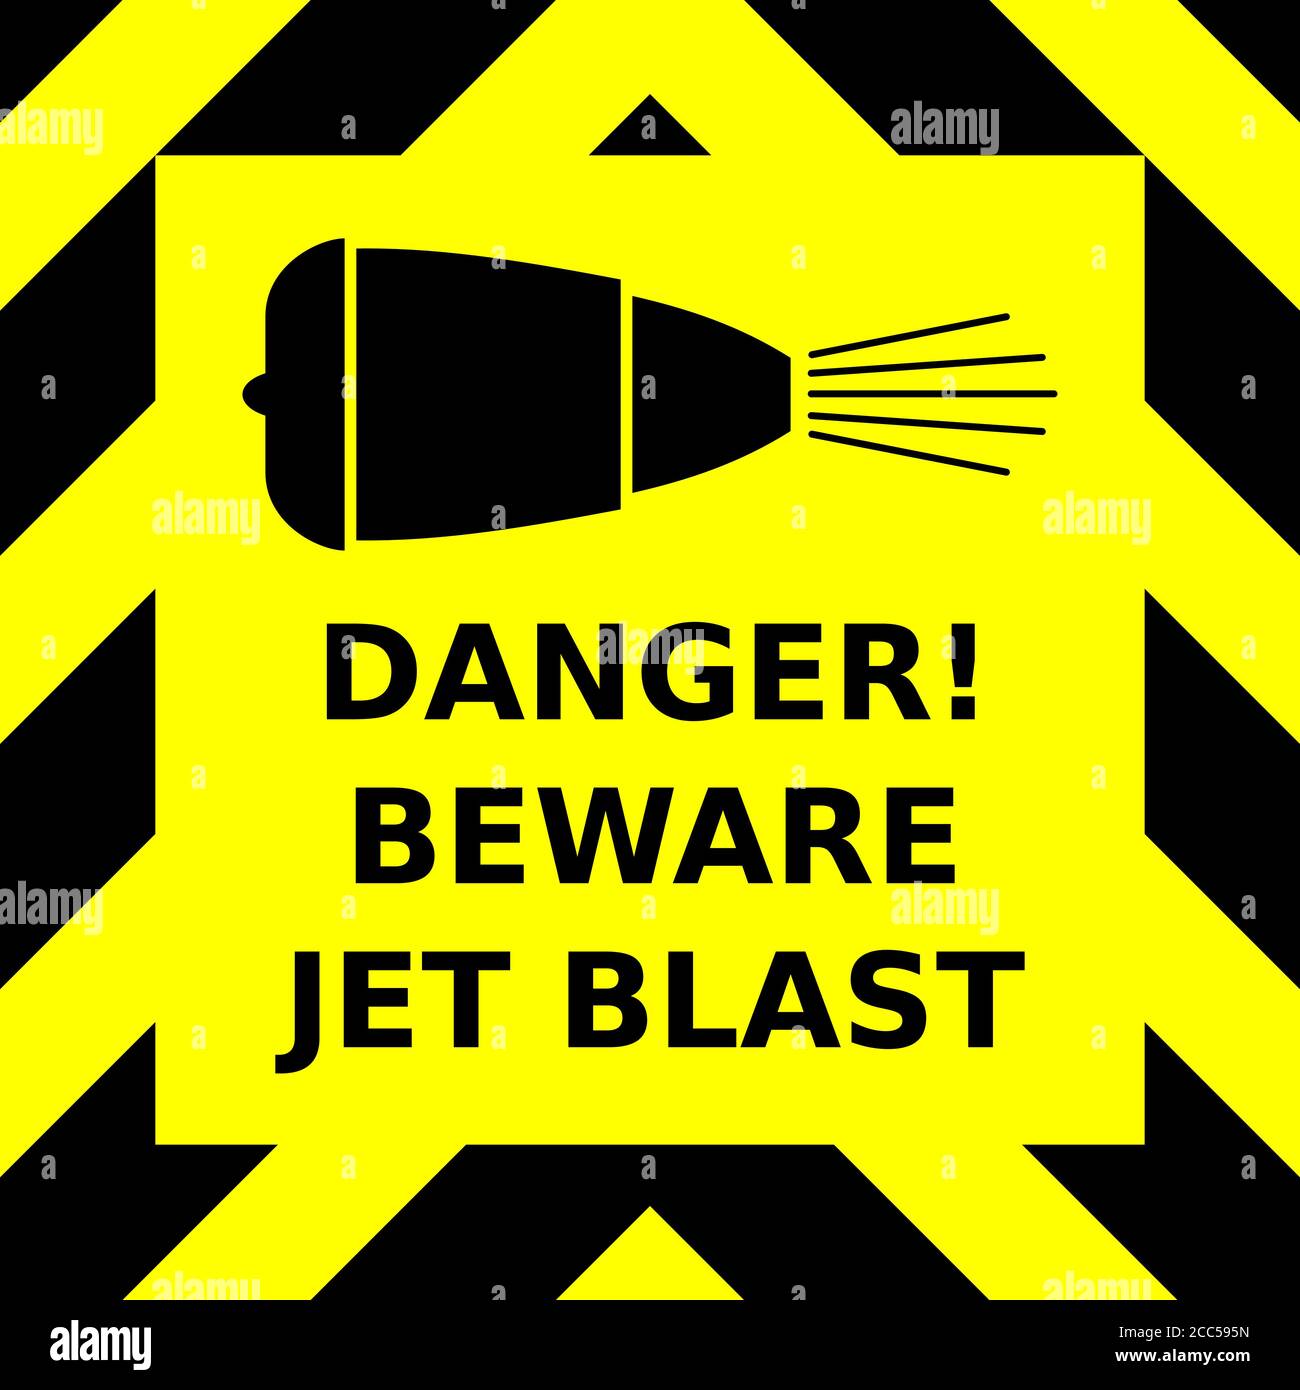 Black and yellow chevron vector graphic sign advising of the danger of jet blast Stock Vector